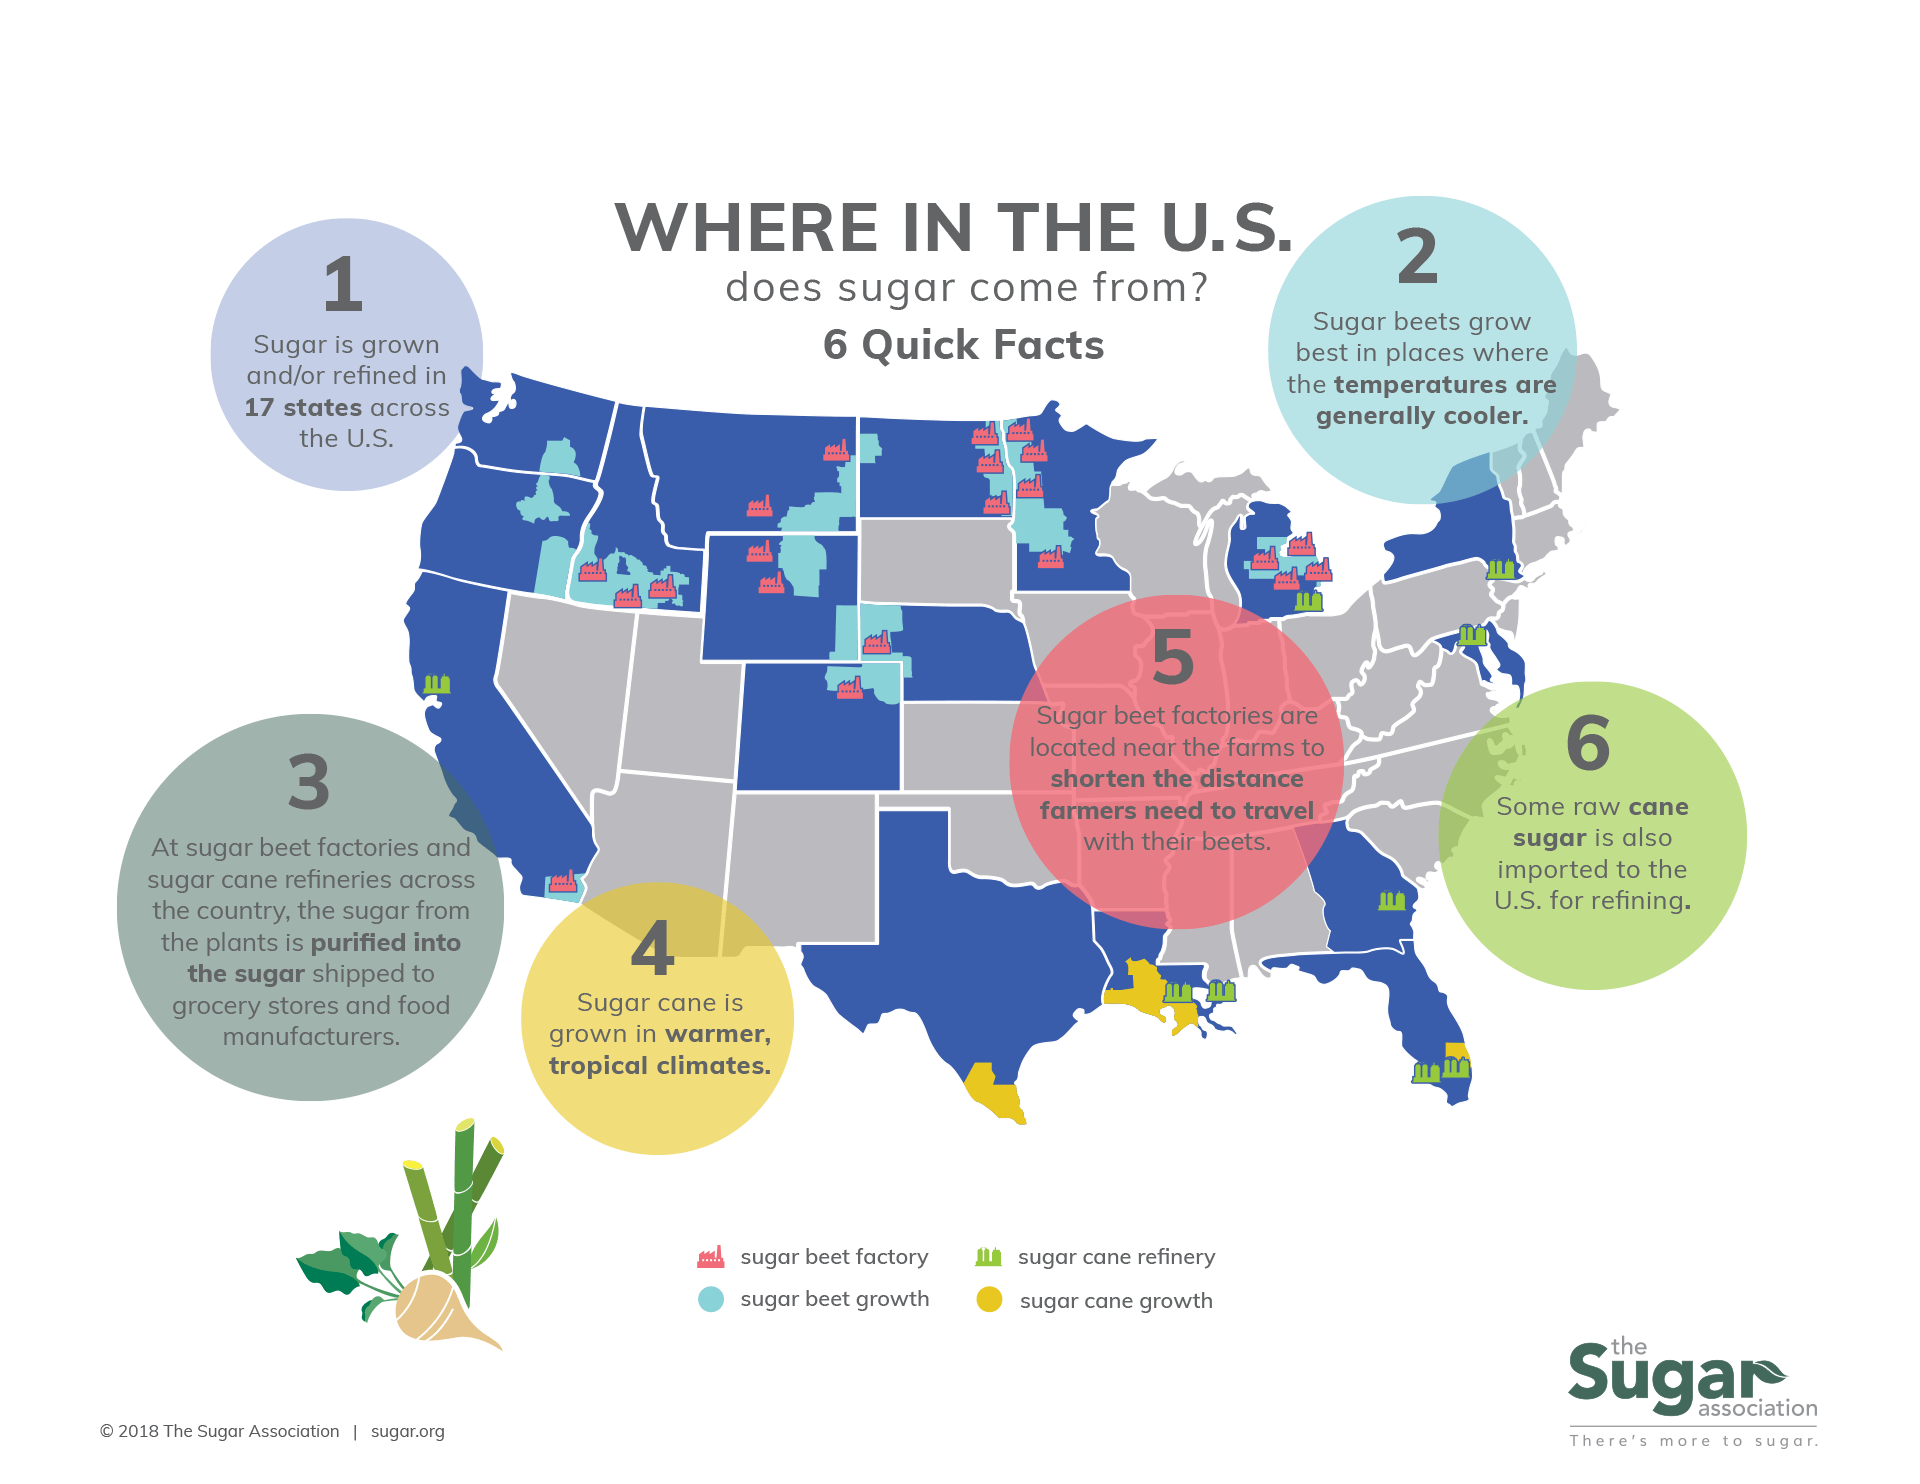 Where Does Sugar Come From?